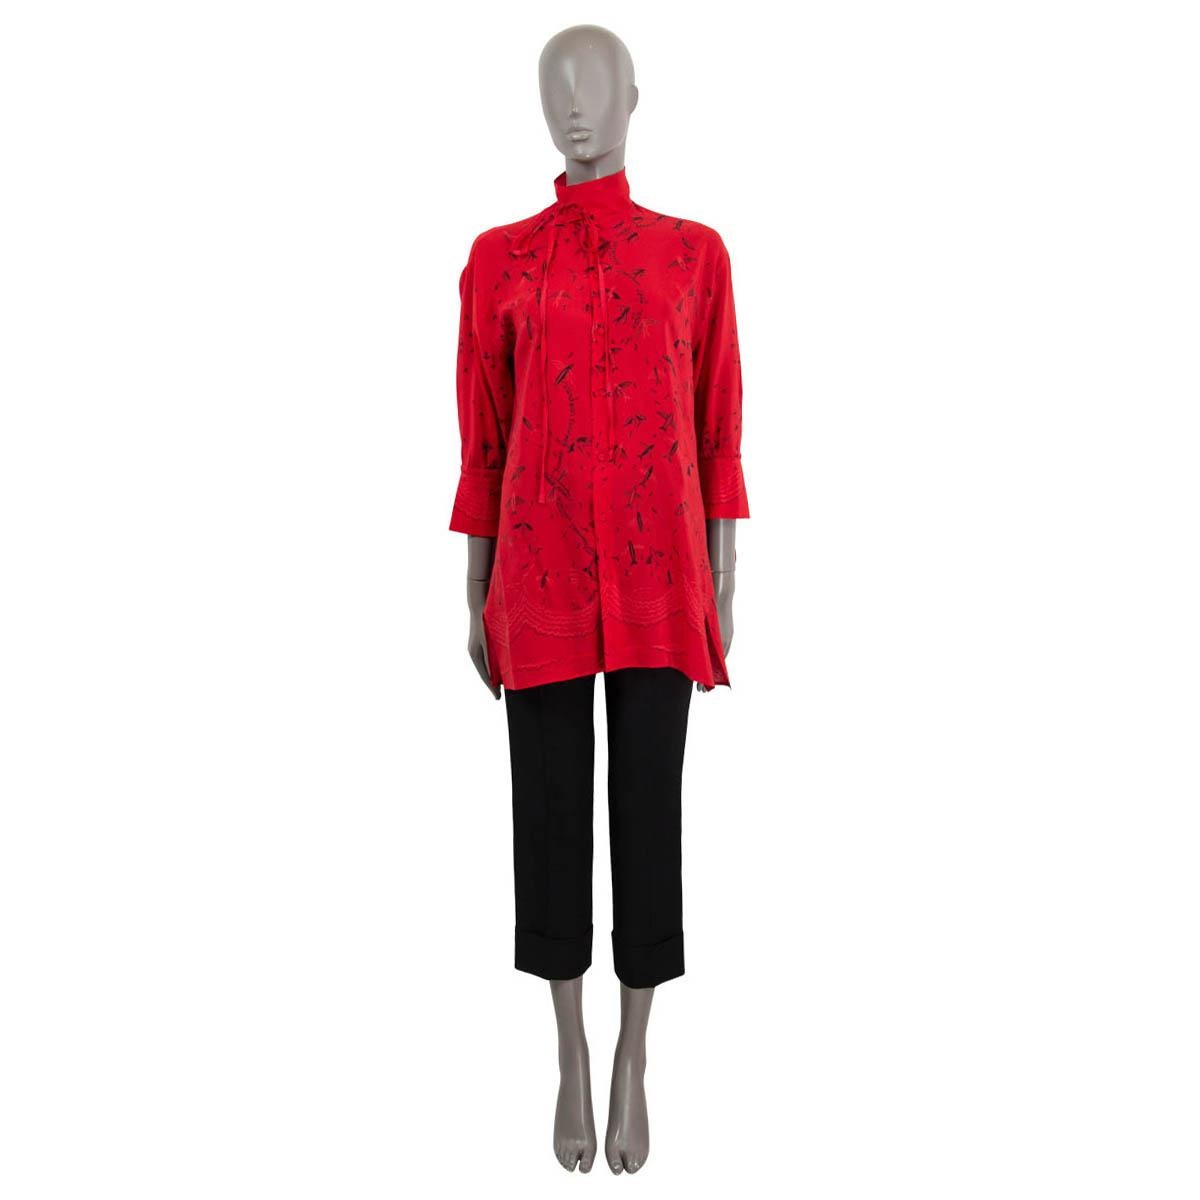 100% authentic Valentino high-neck pussy-bow tunic shirt in red silk (100%). Features a high-low cut and poet sleeves. Opens with seven buttons on the front. Unlined. Has been and worn and is excellent condition. 

Measurements
Tag